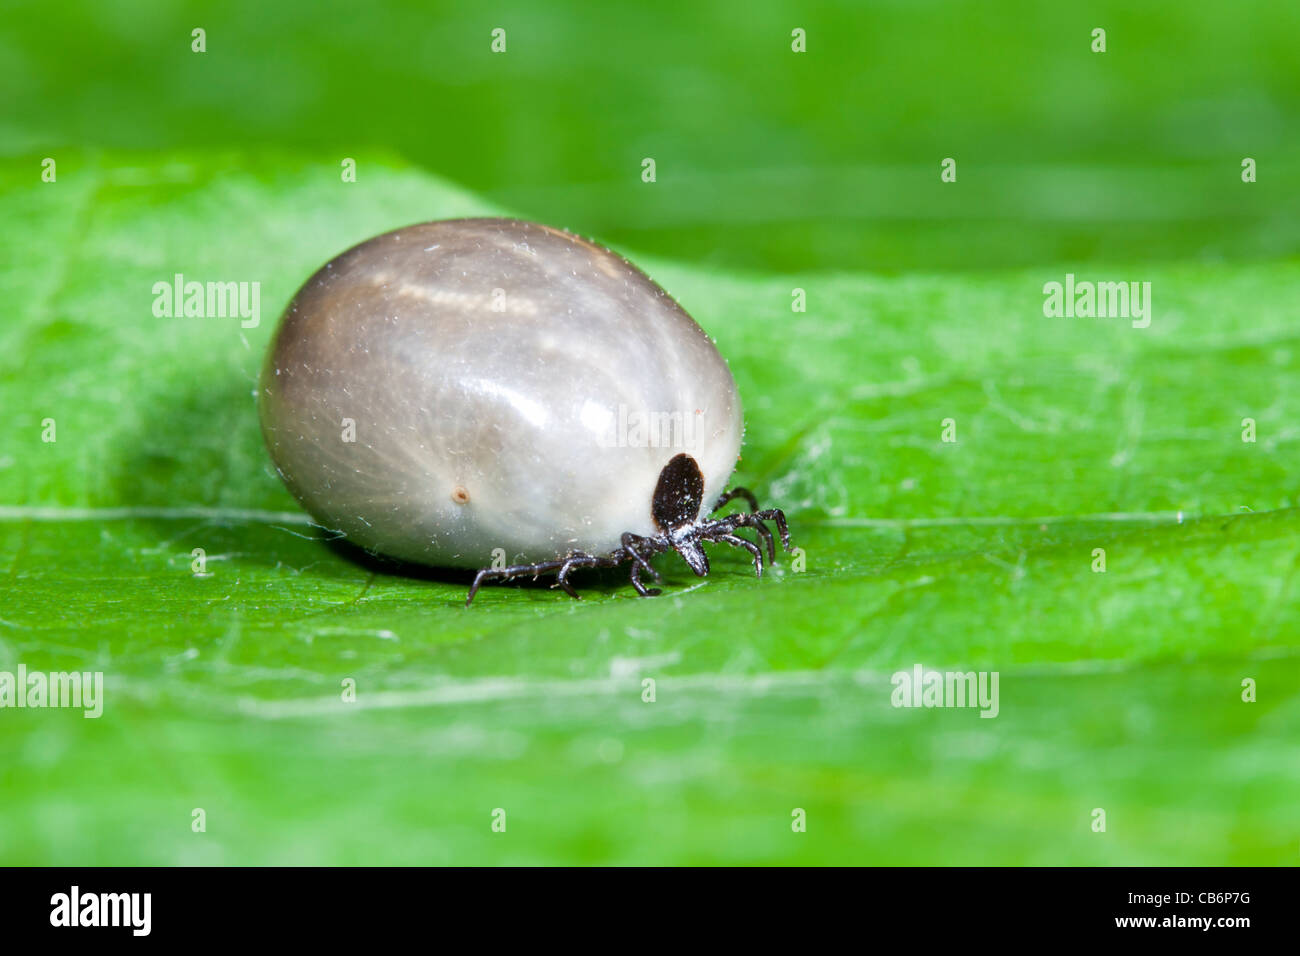 Tick (Ixodeus ricinus), mature insect gourged with blood, Lower Saxony, Germany Stock Photo